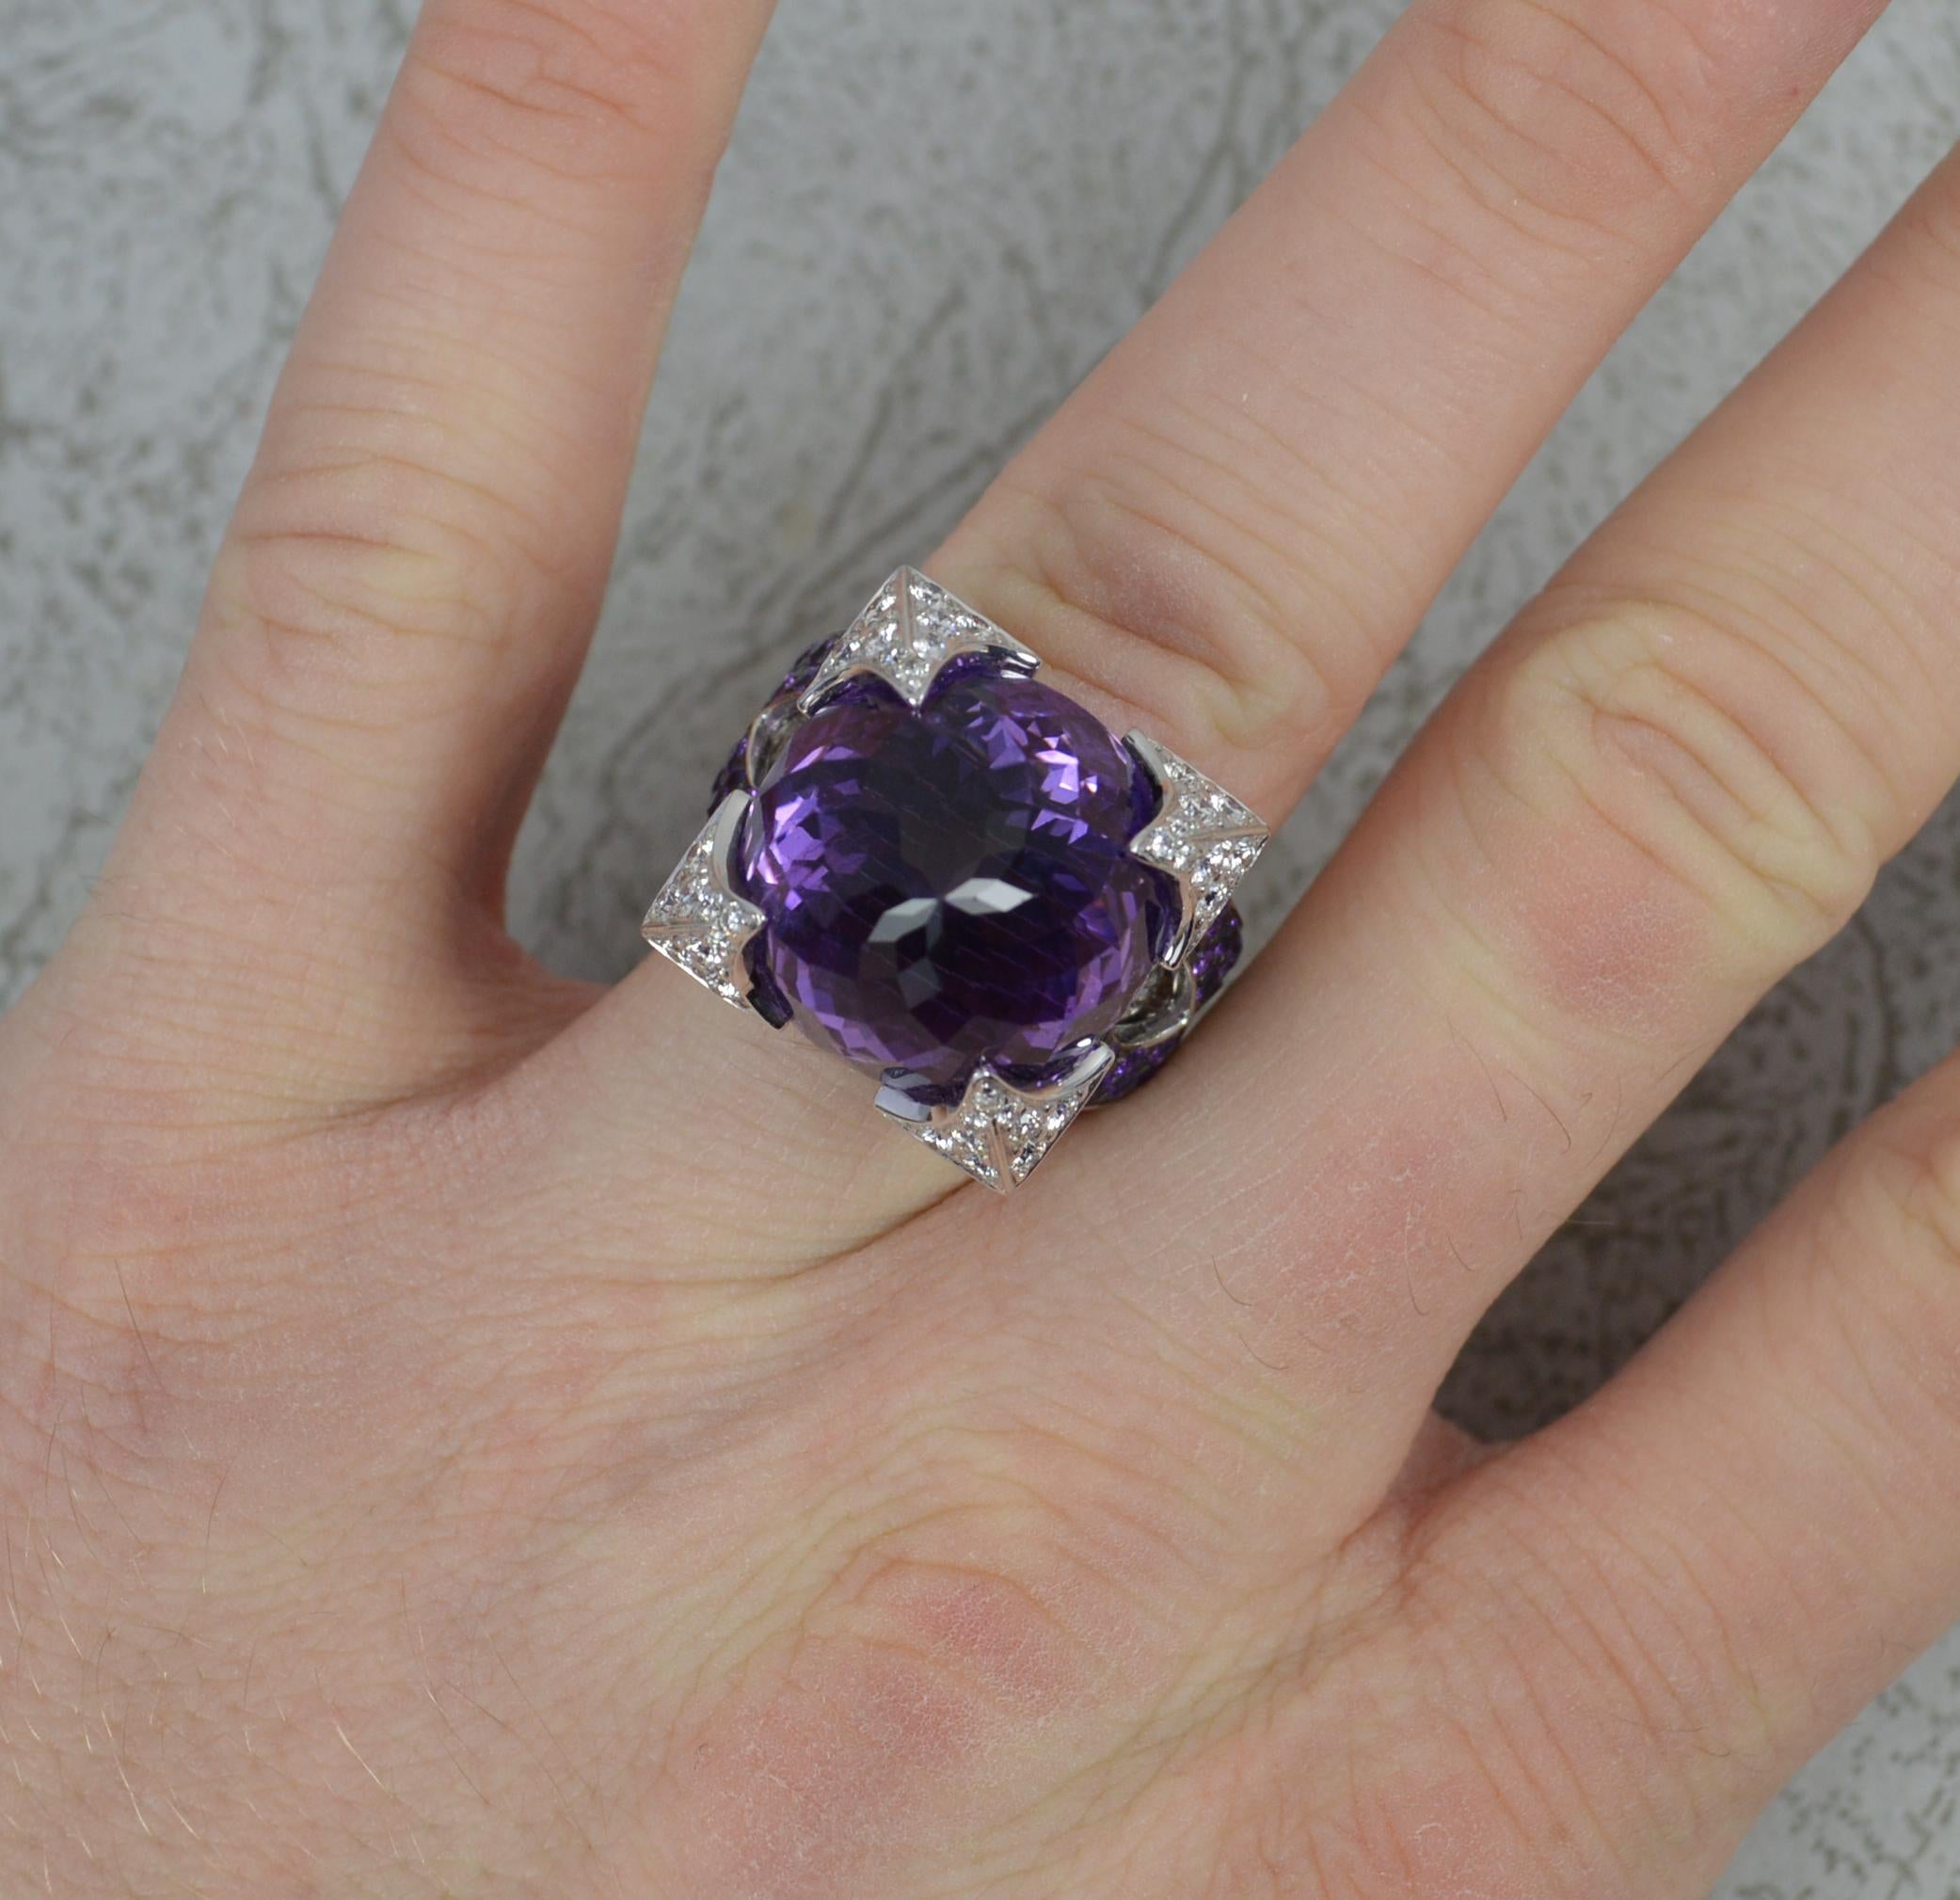 A striking Rodney Rayner designer ring. Part of the Dragon range.
Solid and heavy 18 carat white gold example.
Facet cut top amethyst to centre, 16mm diameter. Four large claws to each corner, pave set with round brilliant cut diamonds.
To the